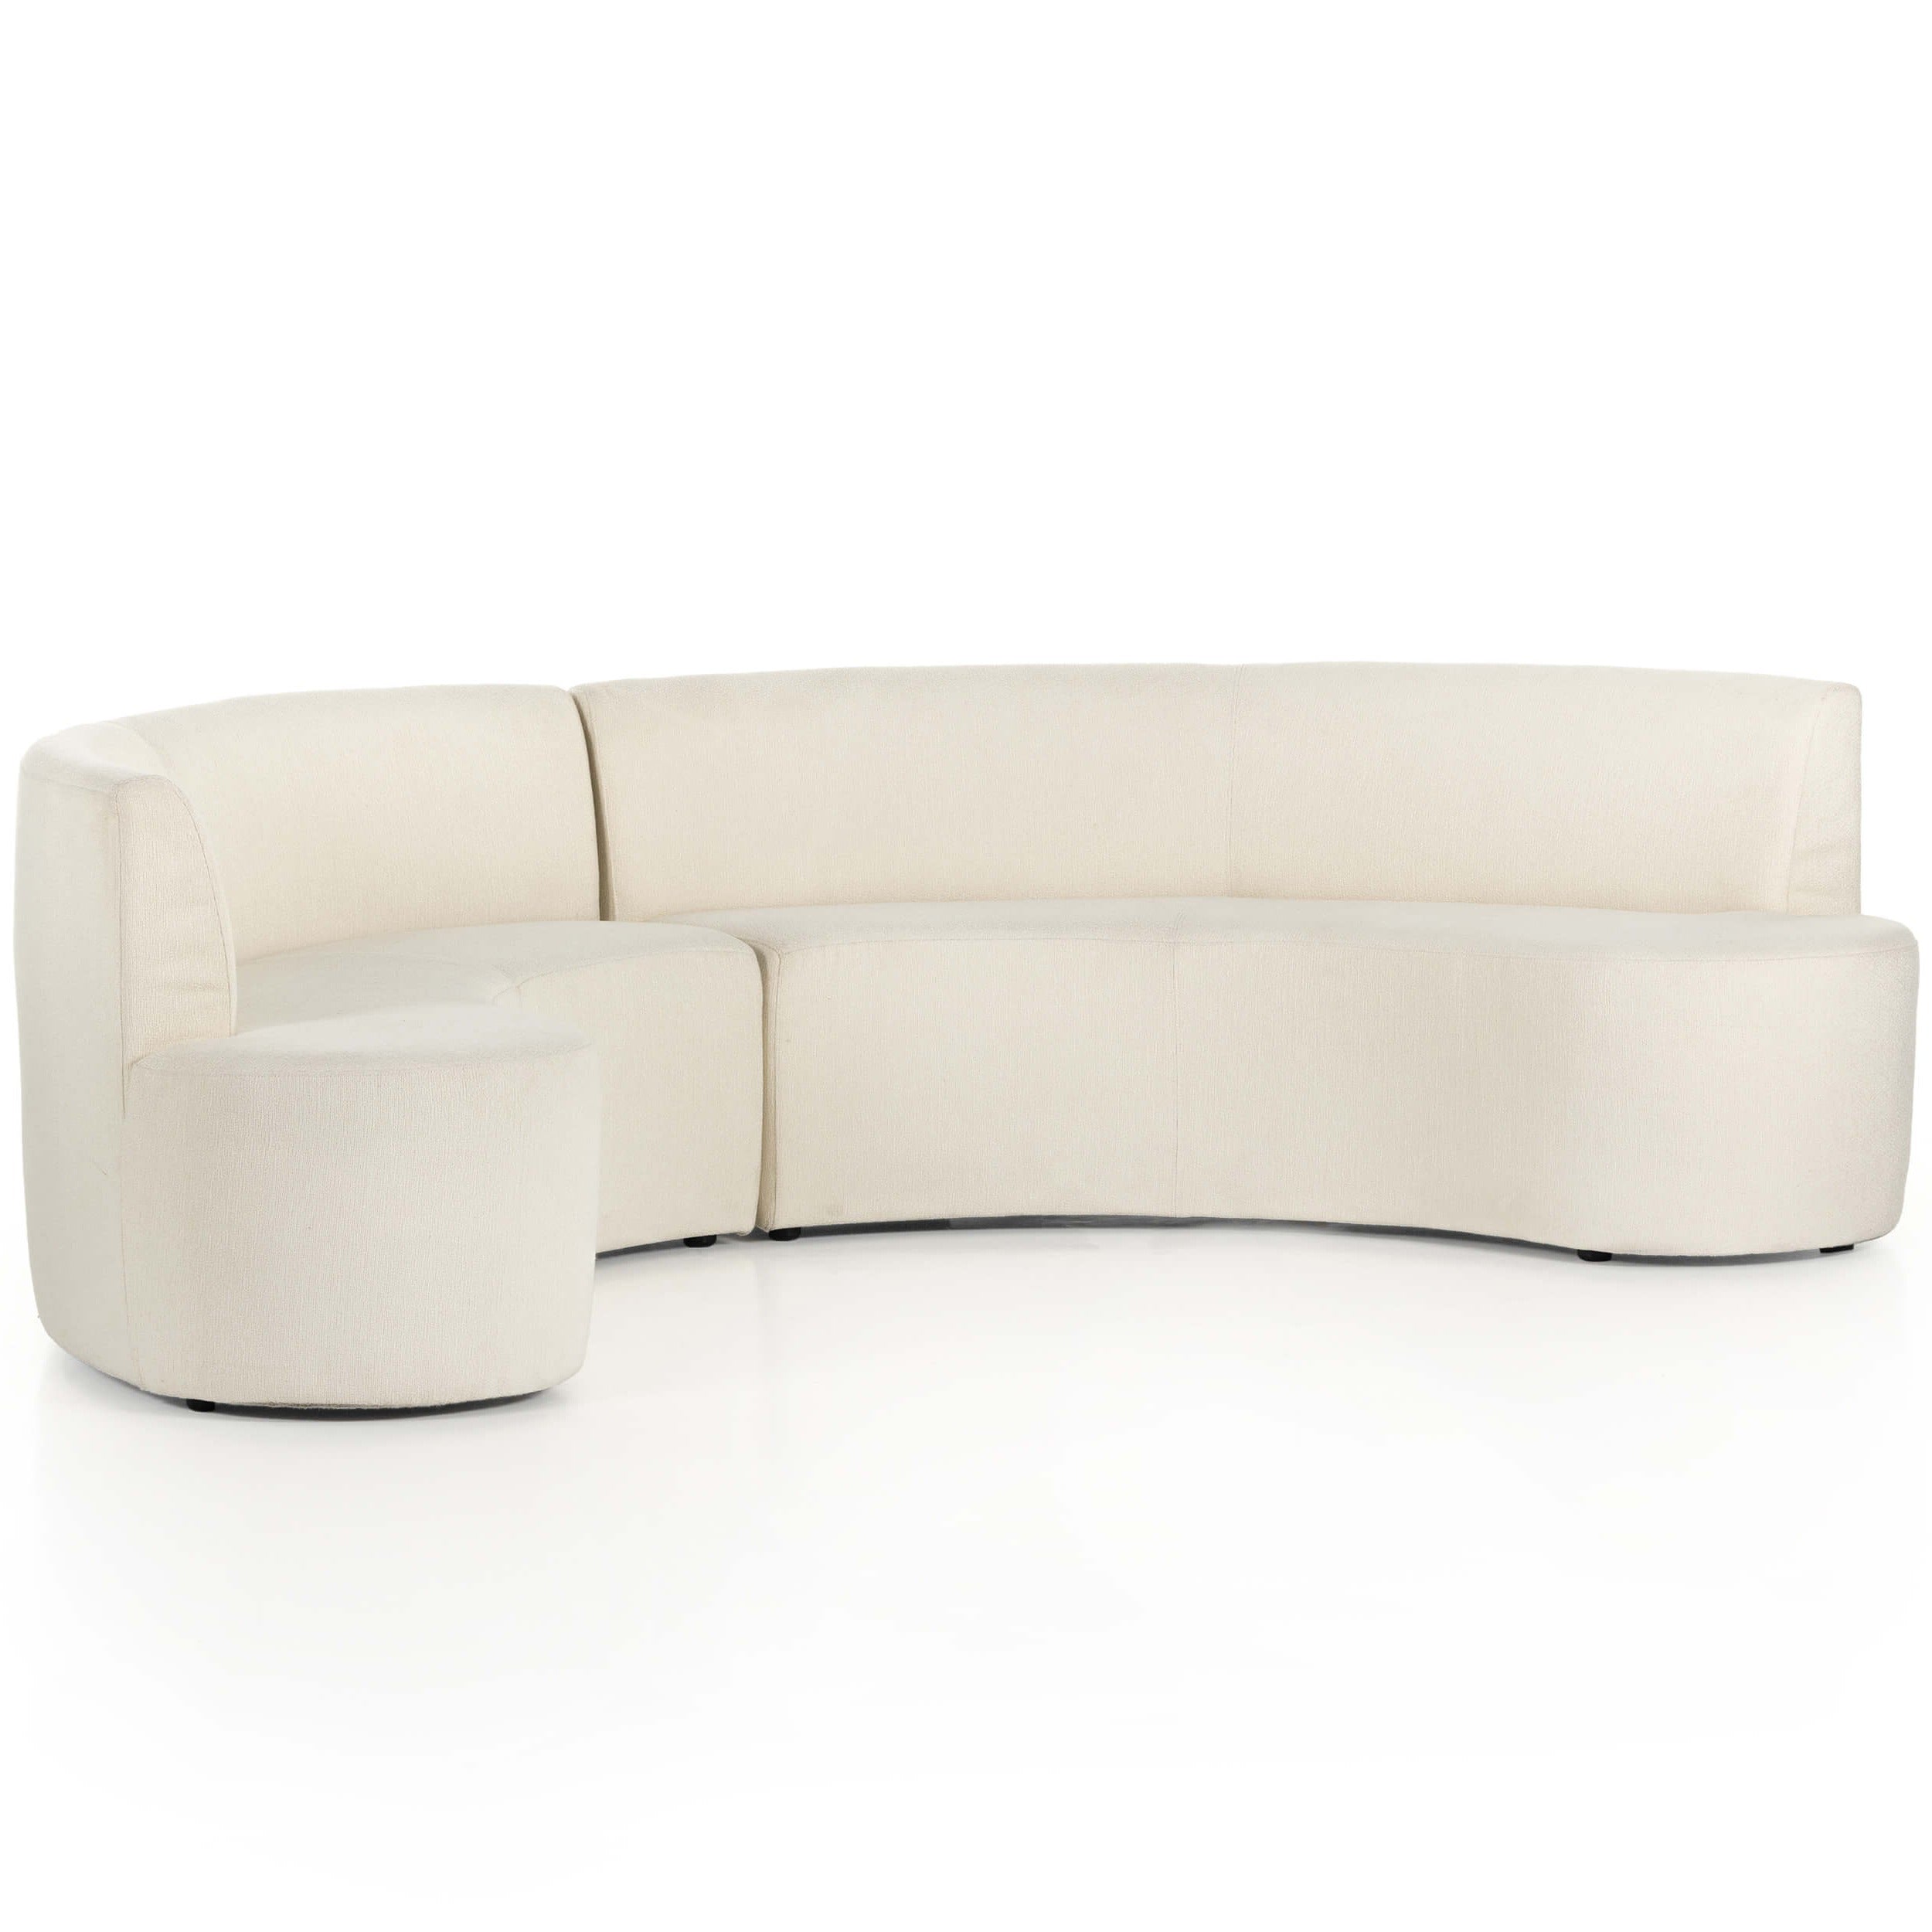 Image of Sanda Dining Banquette, Kerby Ivory